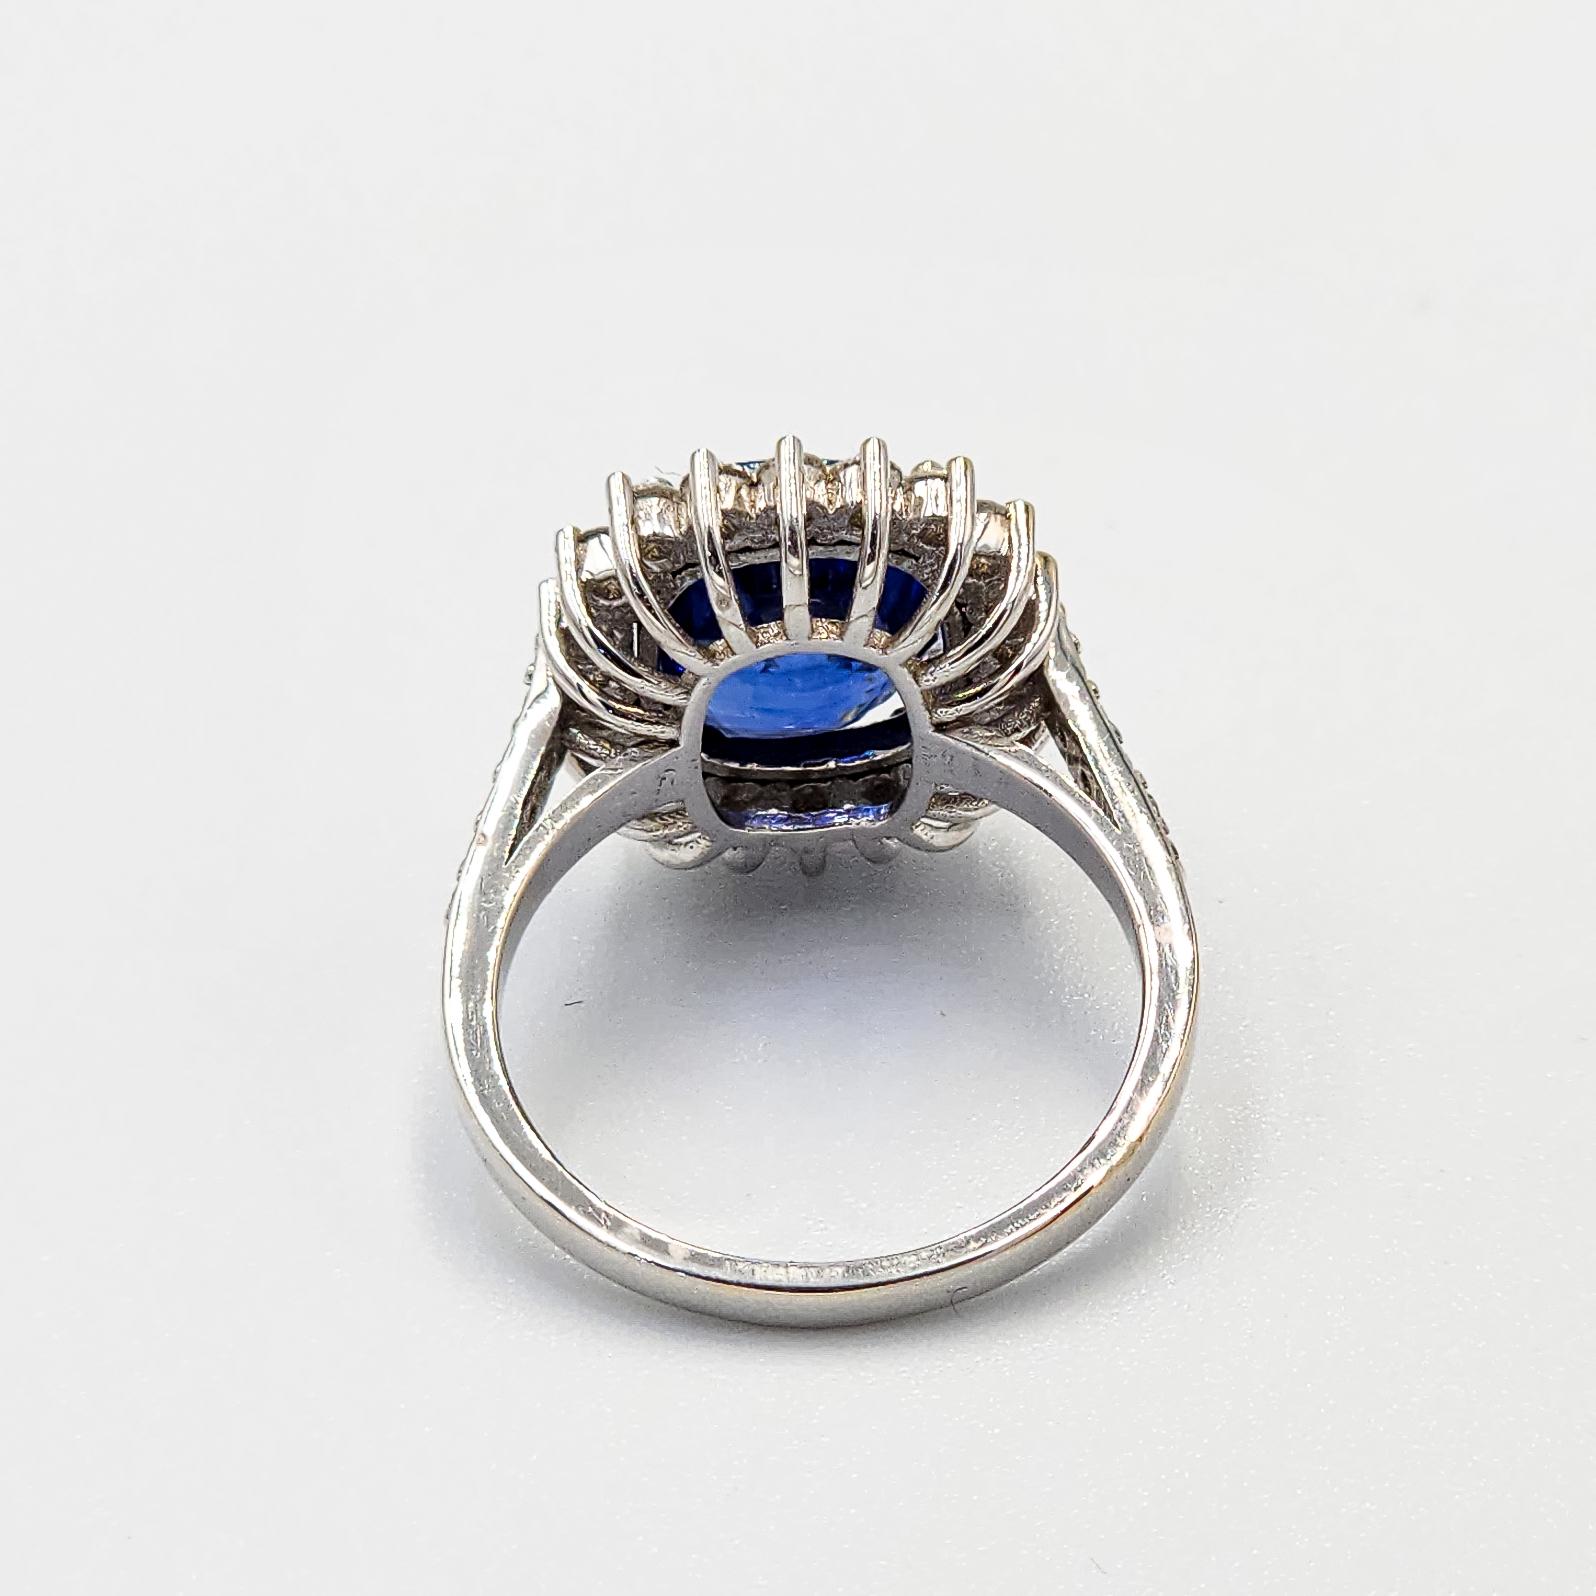 Contemporary GIA Certified 5.18 Carat Velvet Blue Sapphire Ring with Diamonds in 18k Gold For Sale